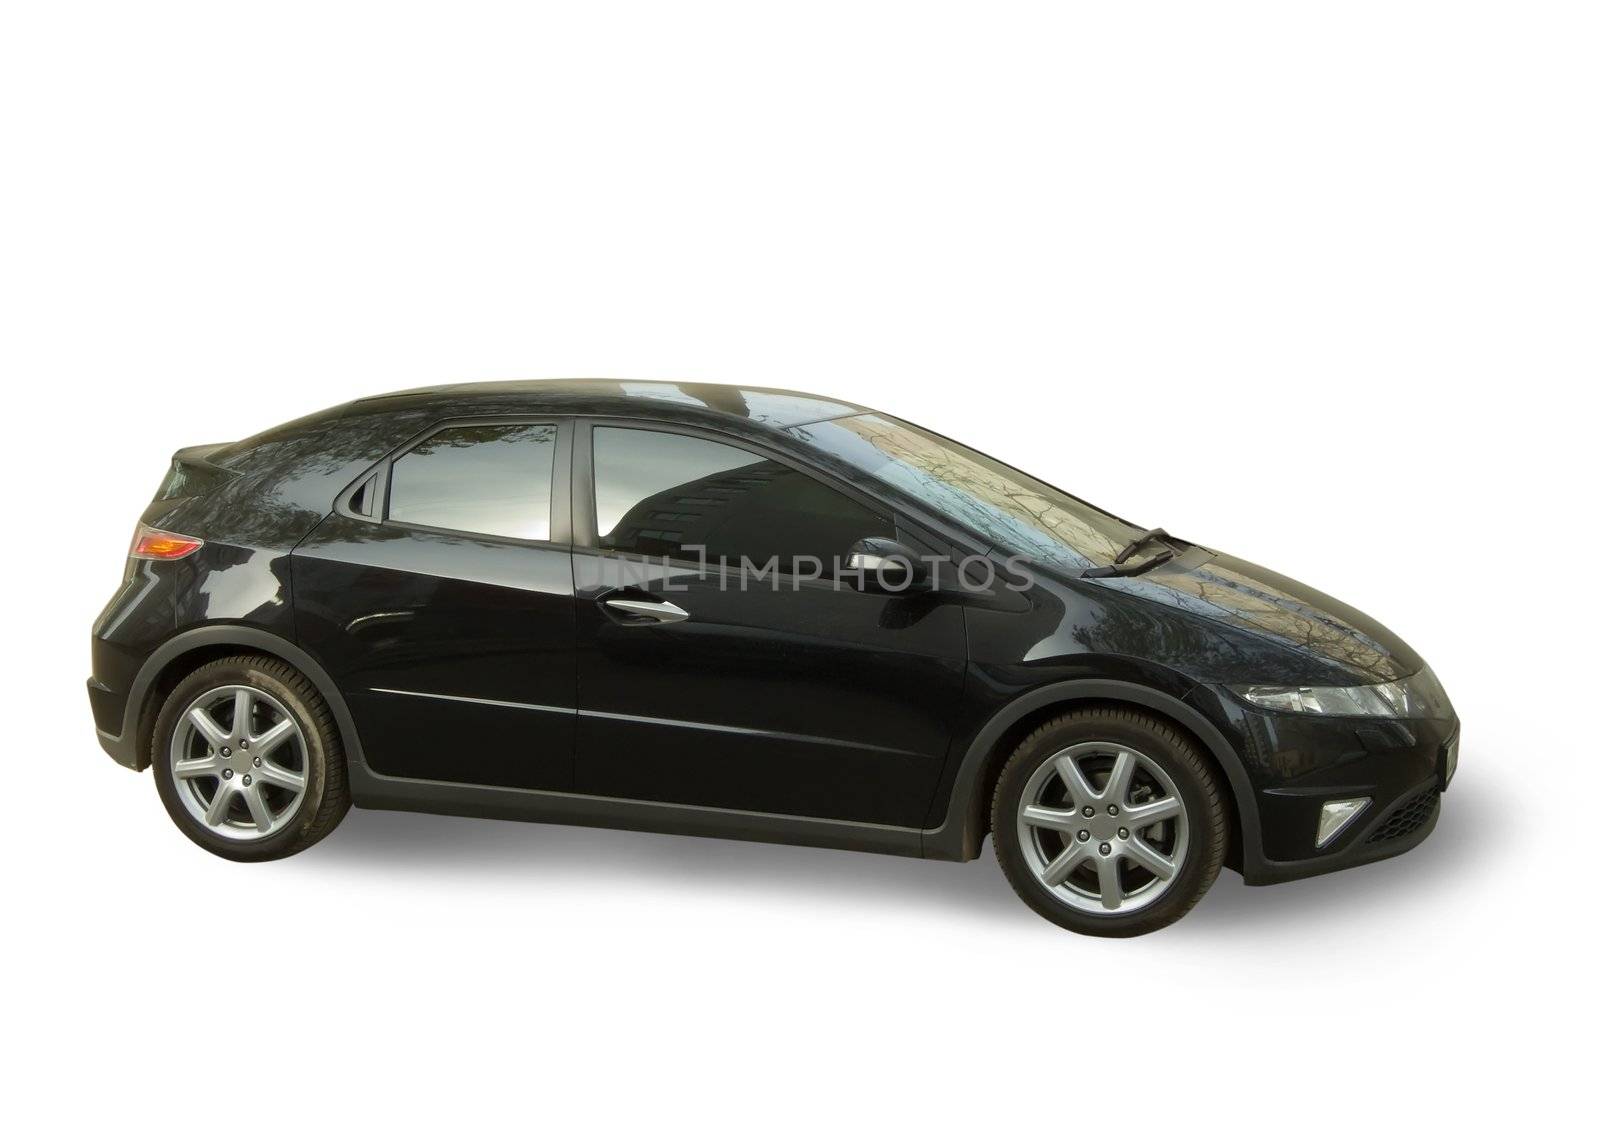 black new sportscar on white. Isolated whith clipping path